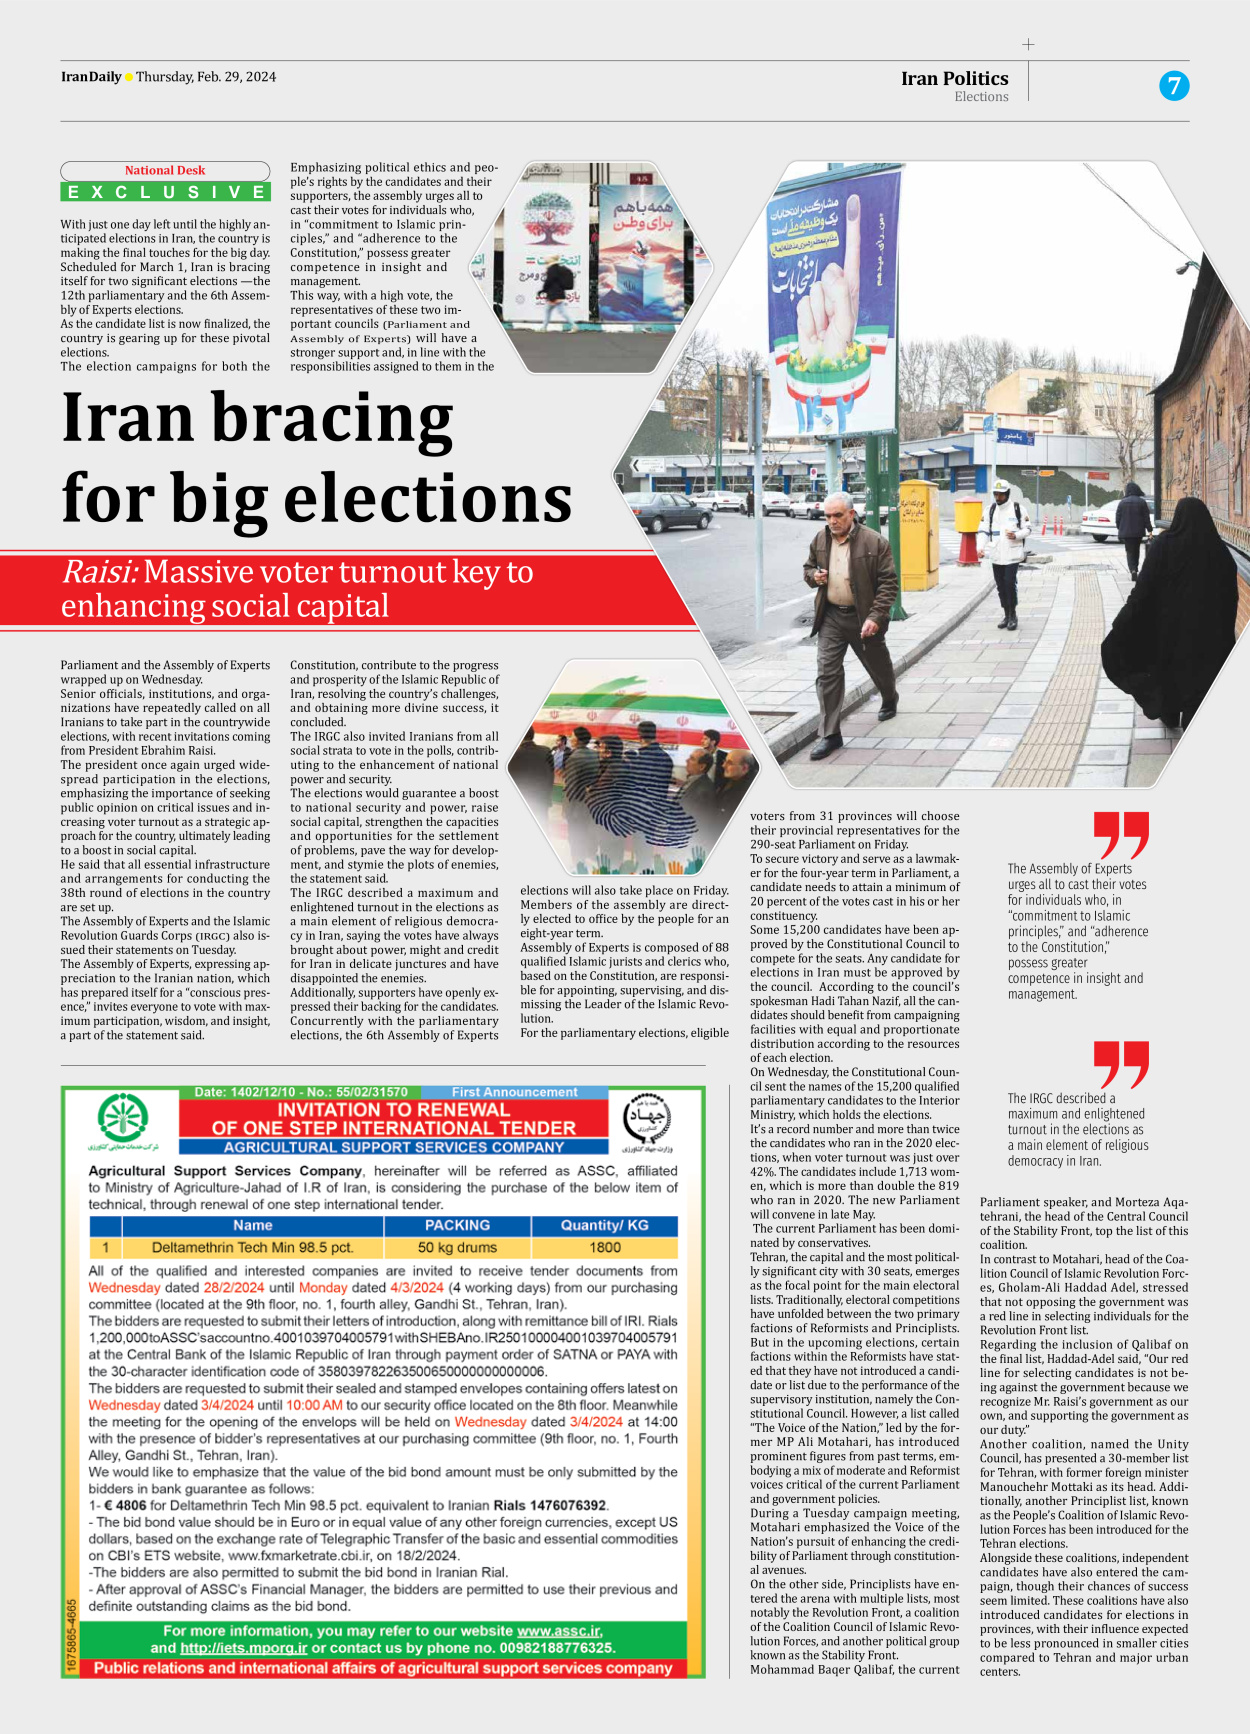 Iran Daily - Number Seven Thousand Five Hundred and Eighteen - 29 February 2024 - Page 7